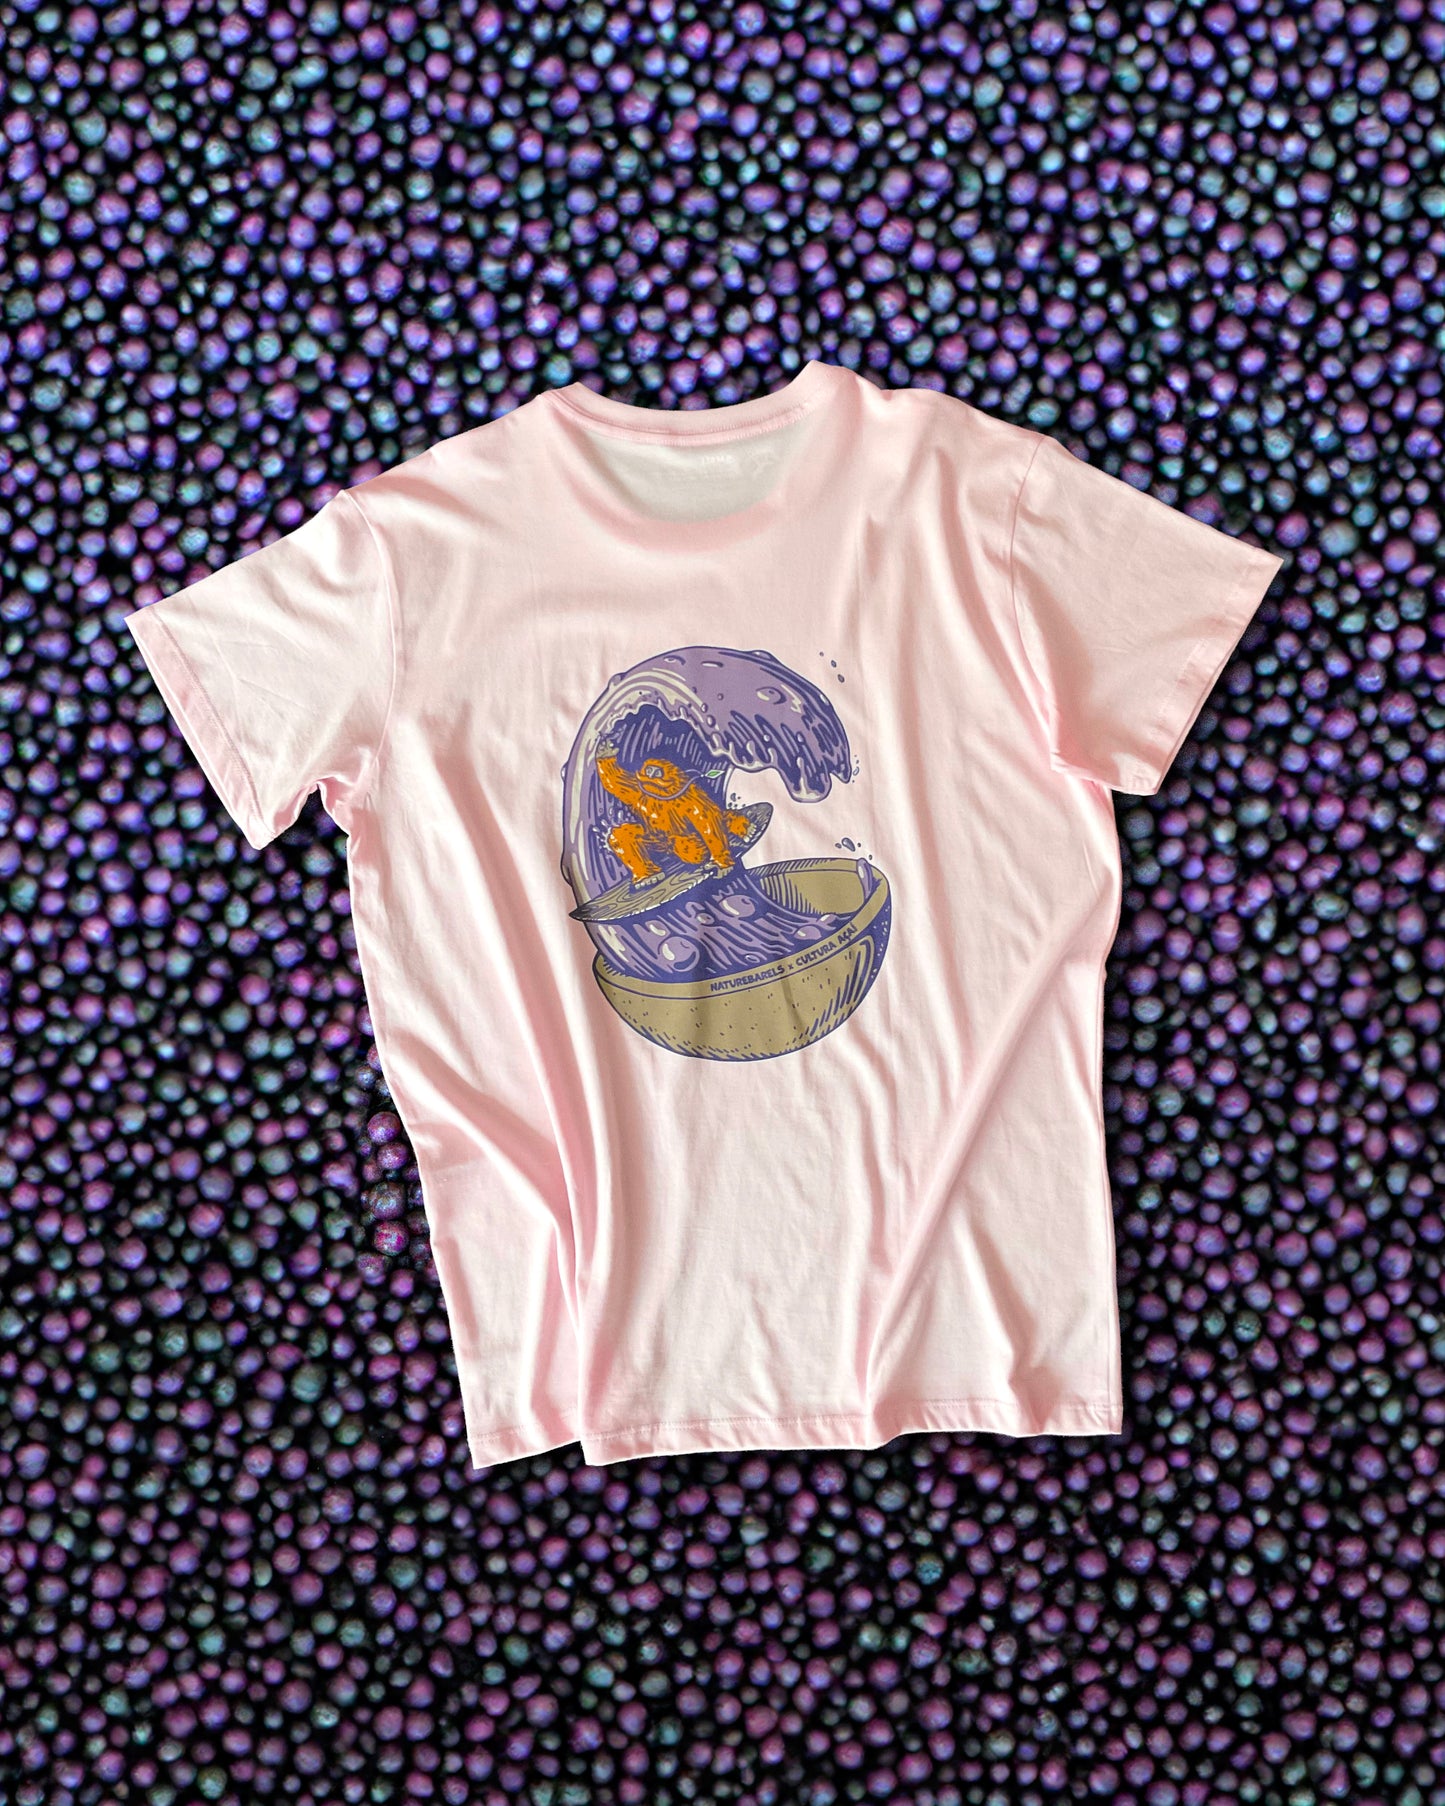 A light pink t-shirt with a large graphic on the back of an orange sasquatch riding a wooden surfboard on a purple wave made of acai liquid coming out of a bowl. The shirt is displayed against a background of acai berries. 